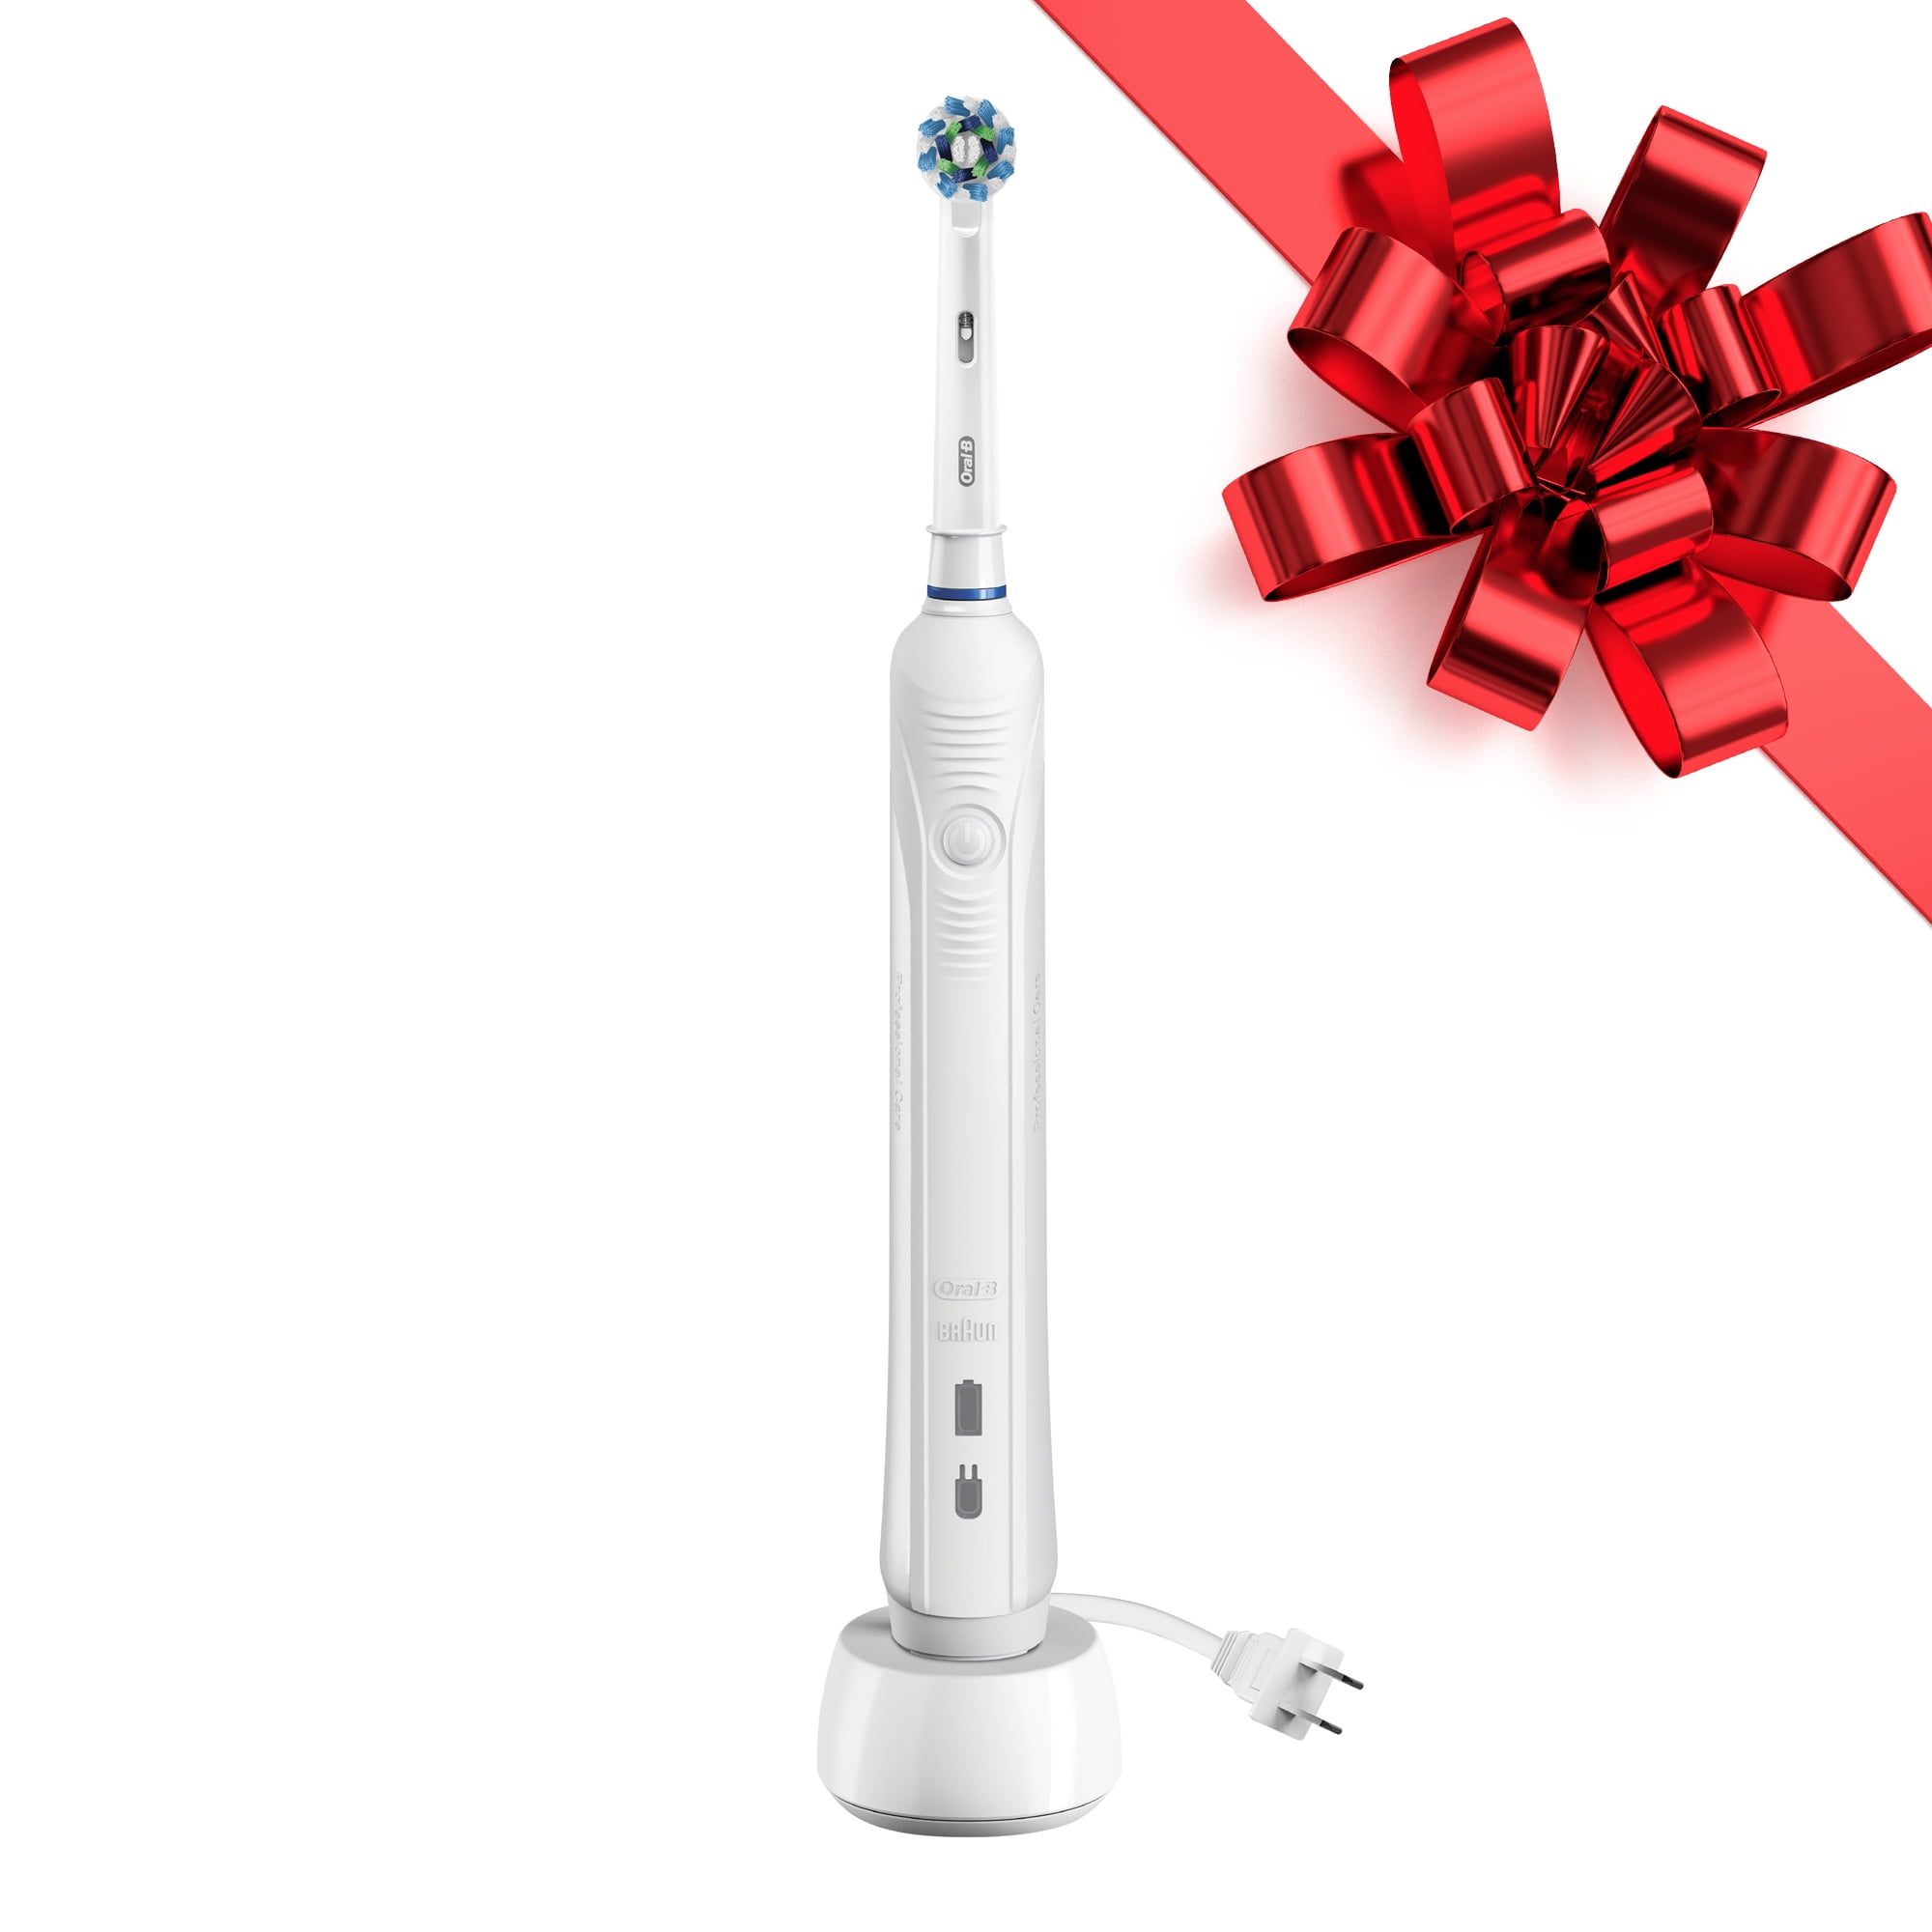 Oral B 1000 CrossAction Electric Toothbrush 5 Rebate Eligible White 